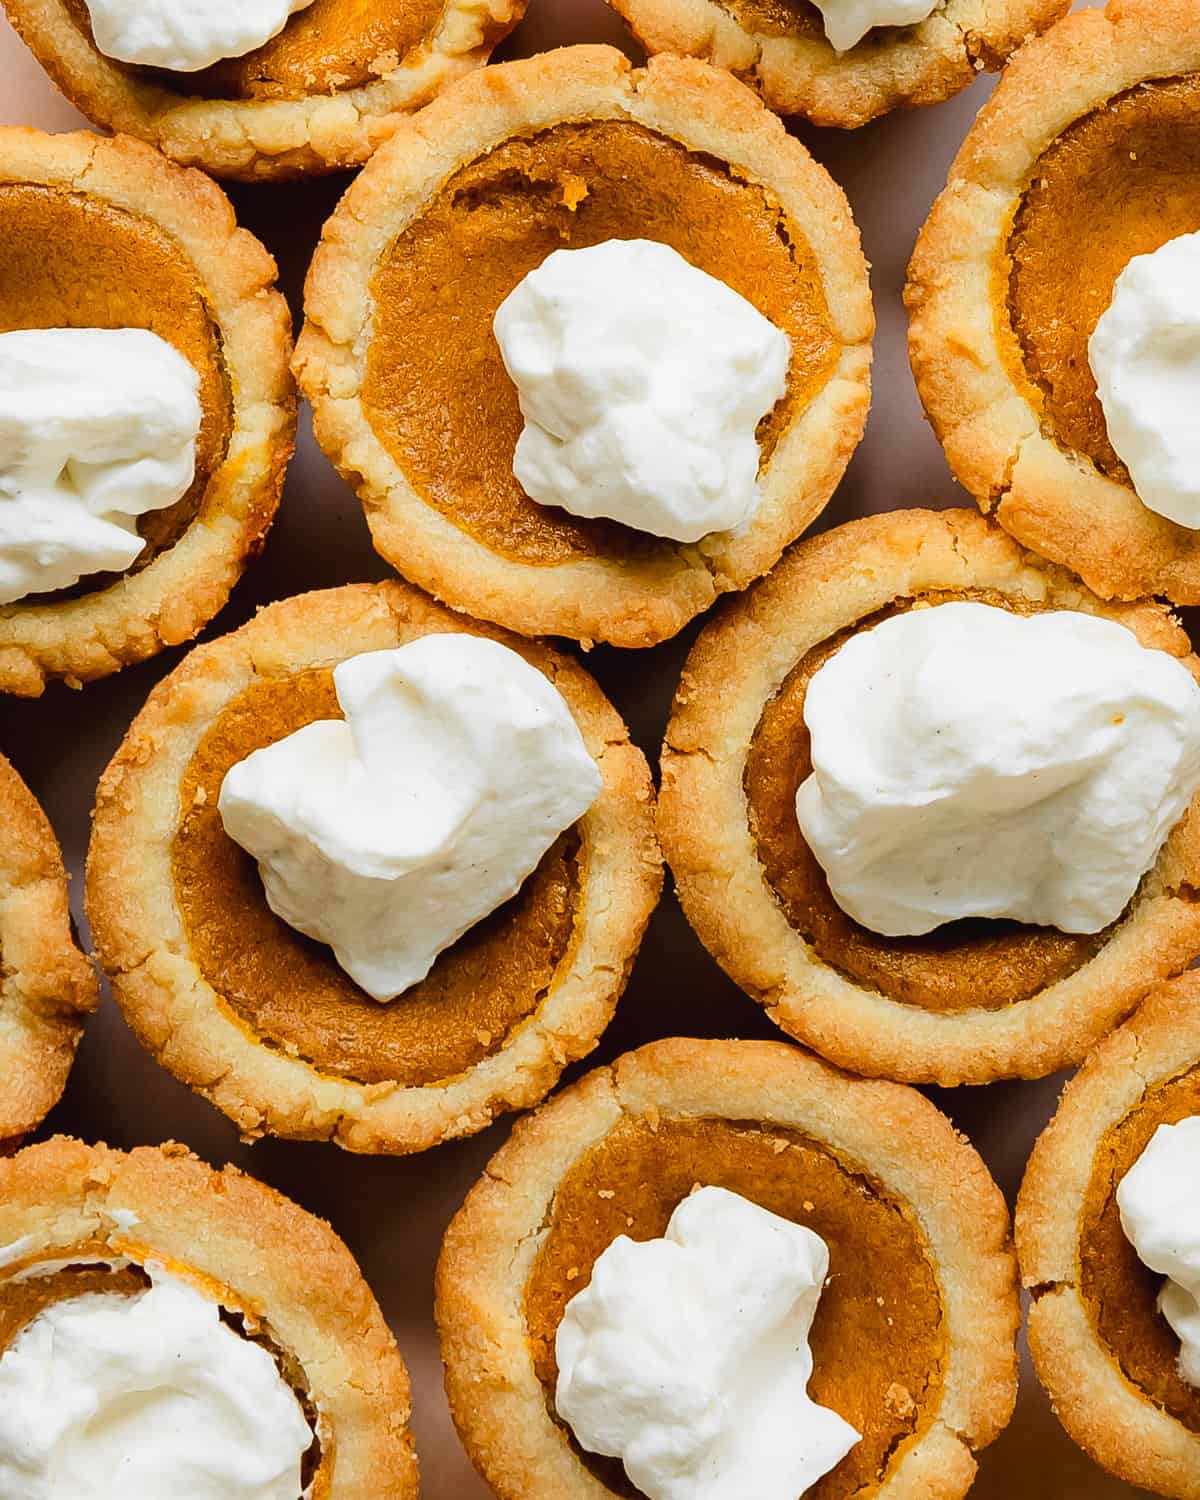 Pumpkin pie cookies are deliciously soft and buttery sugar cookie cups filled with a classic pumpkin pie filling.  This recipe for pumpkin pie cookies are easy to make, require no chilling time and are ready in about 30 minutes. These mini pumpkin cookies are a fun twist on the classic pumpkin pie dessert everyone will love.